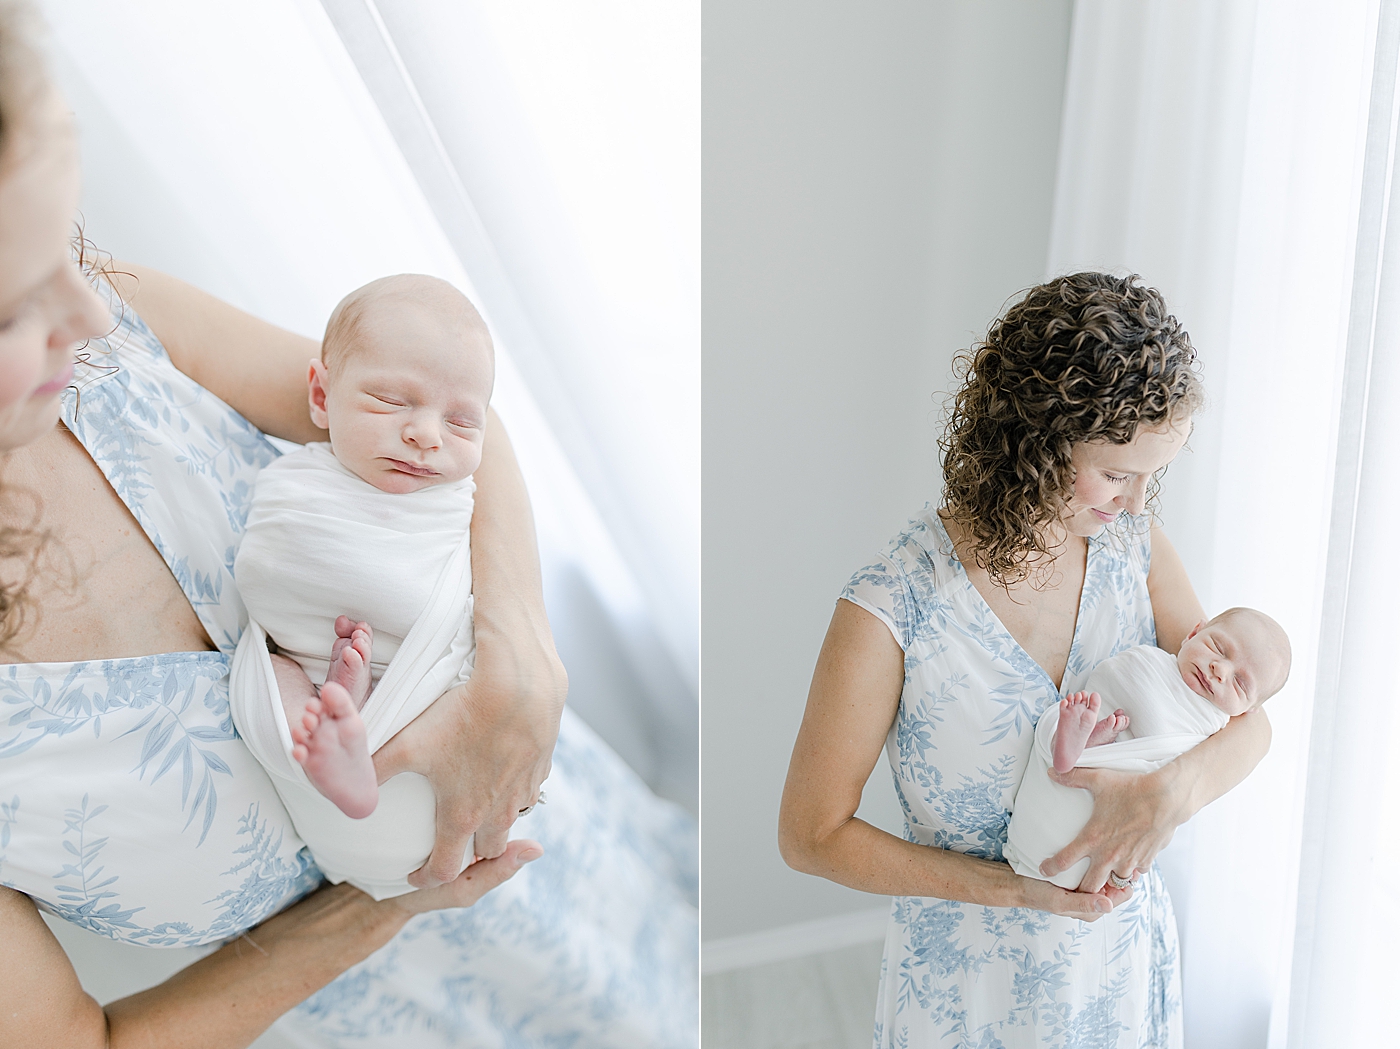 Mom in blue and white dress holding newborn wrapped in white swaddle | Photo by Little Sunshine Photography